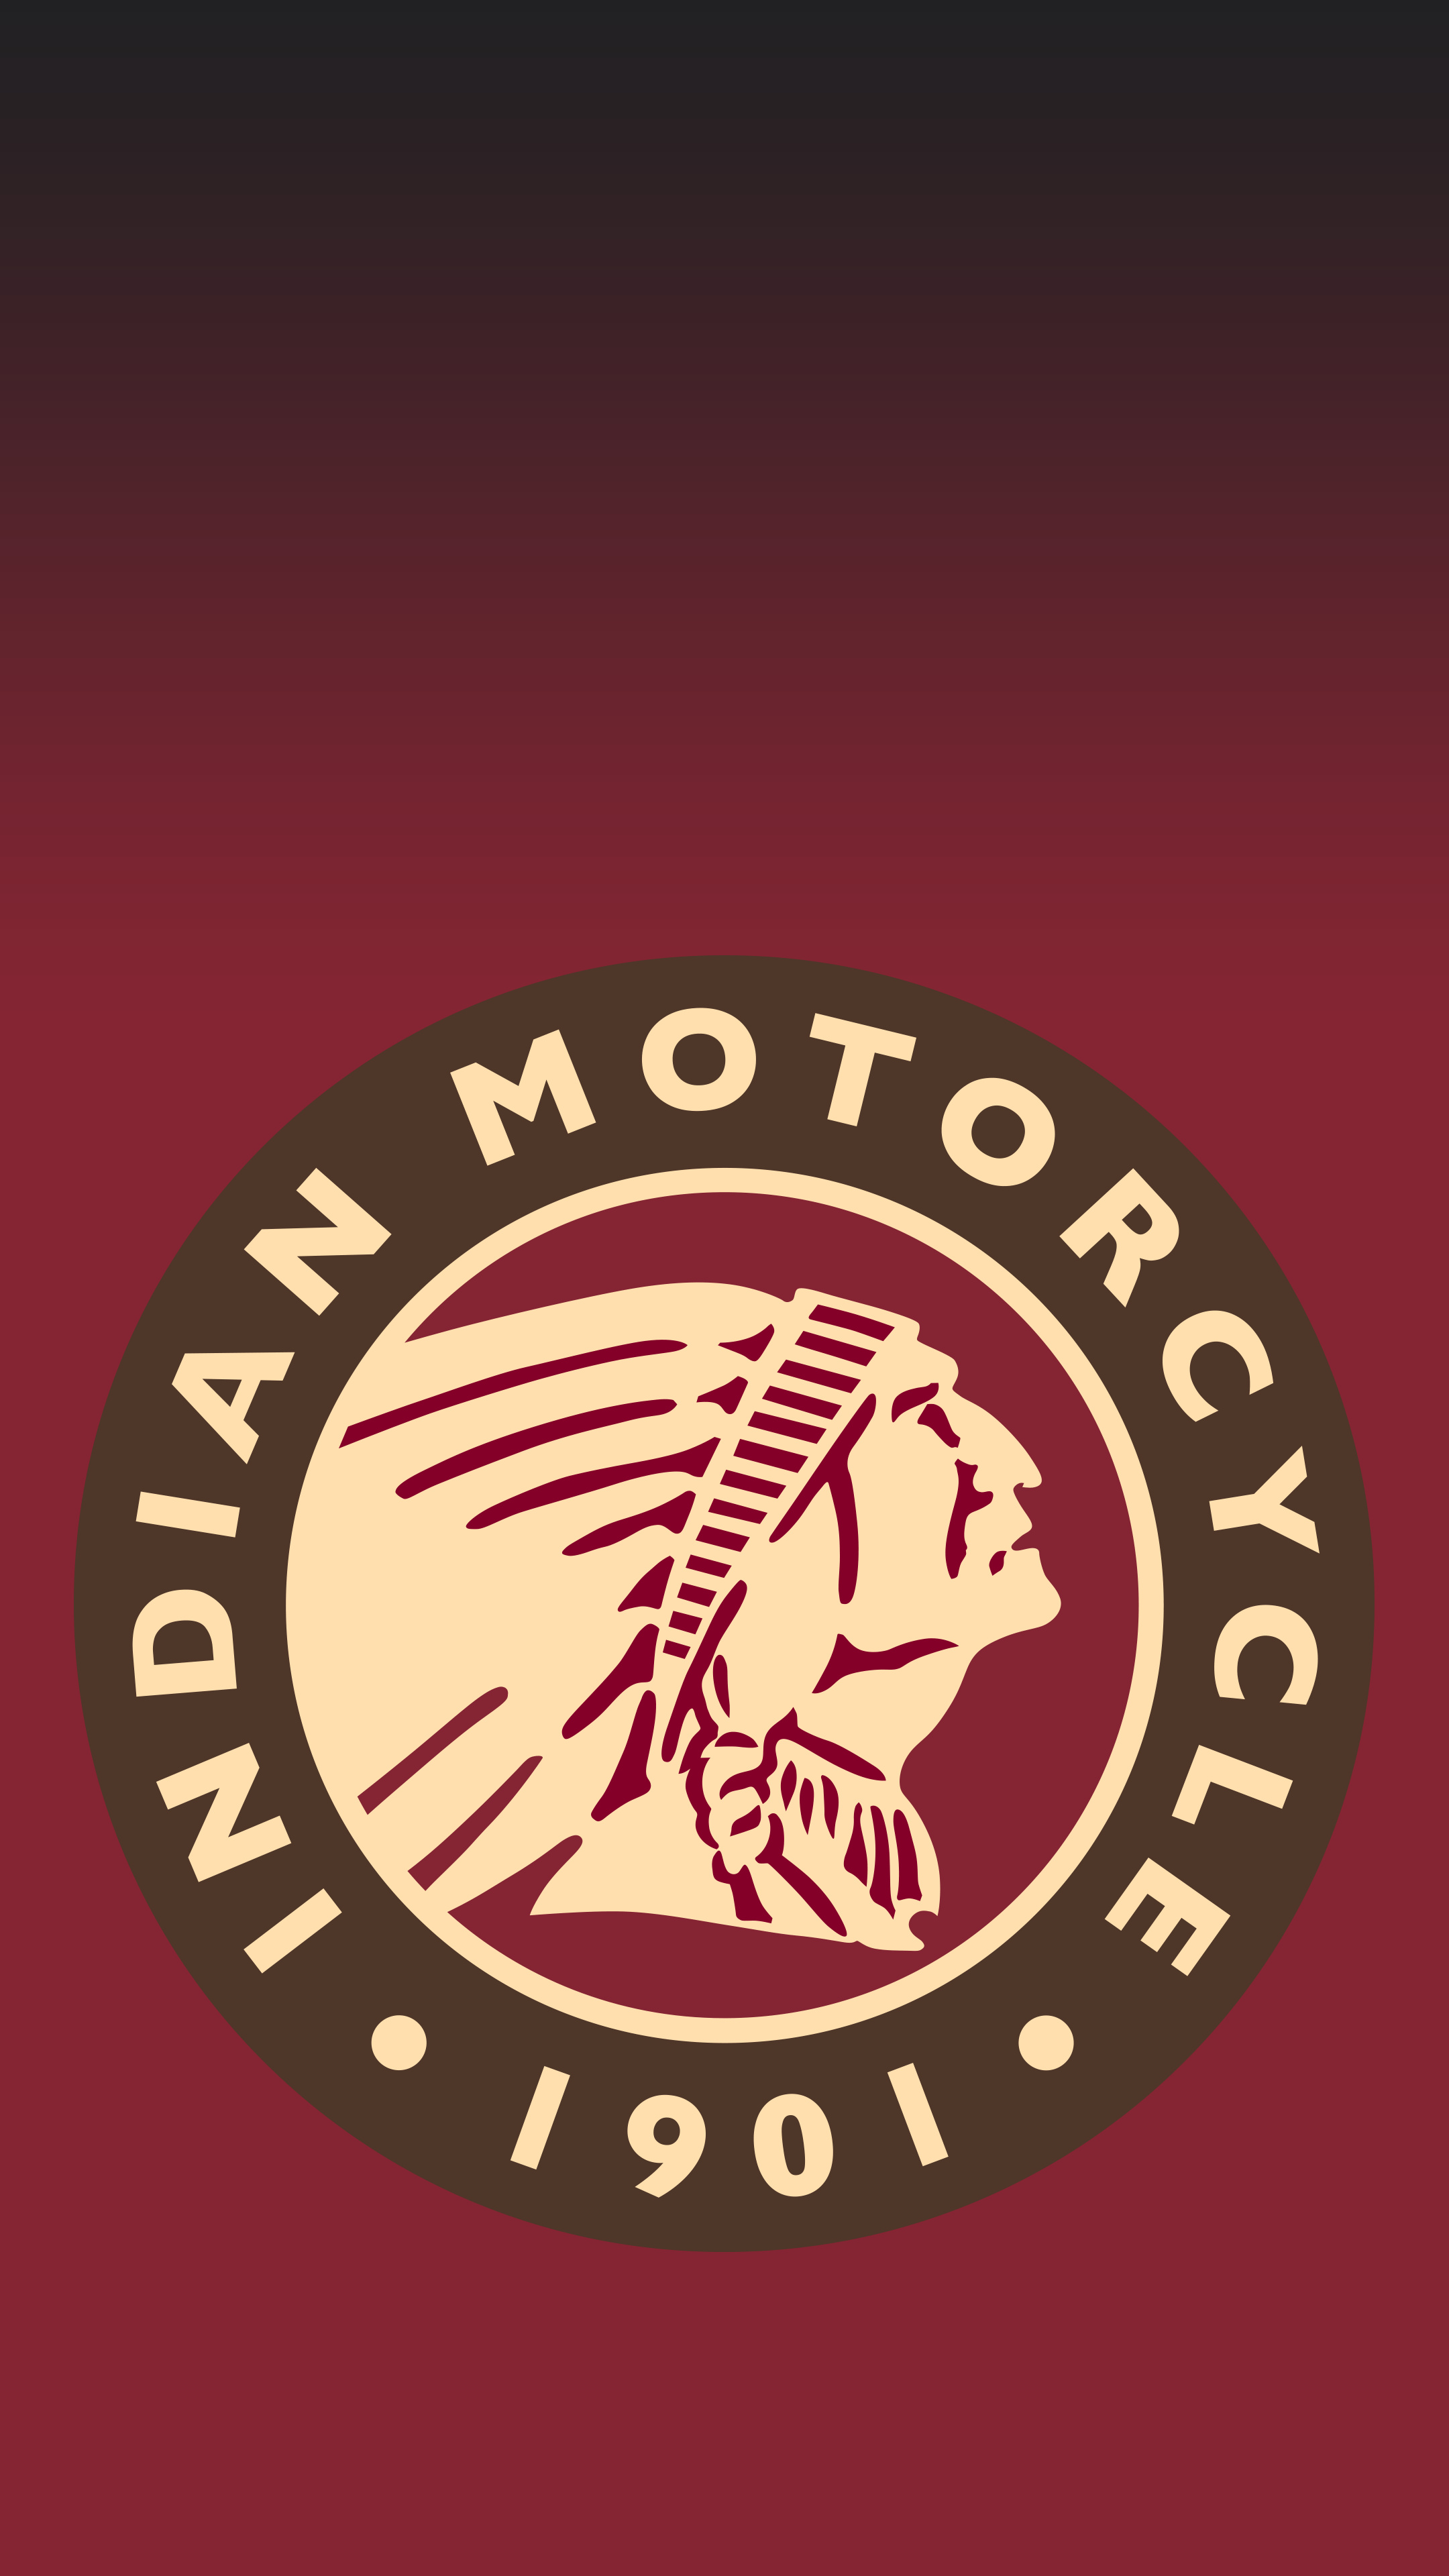 Indian Motorcycle, Logo wallpapers, Classic Indian imagery, Motorcycle brand identity, 2160x3840 4K Handy